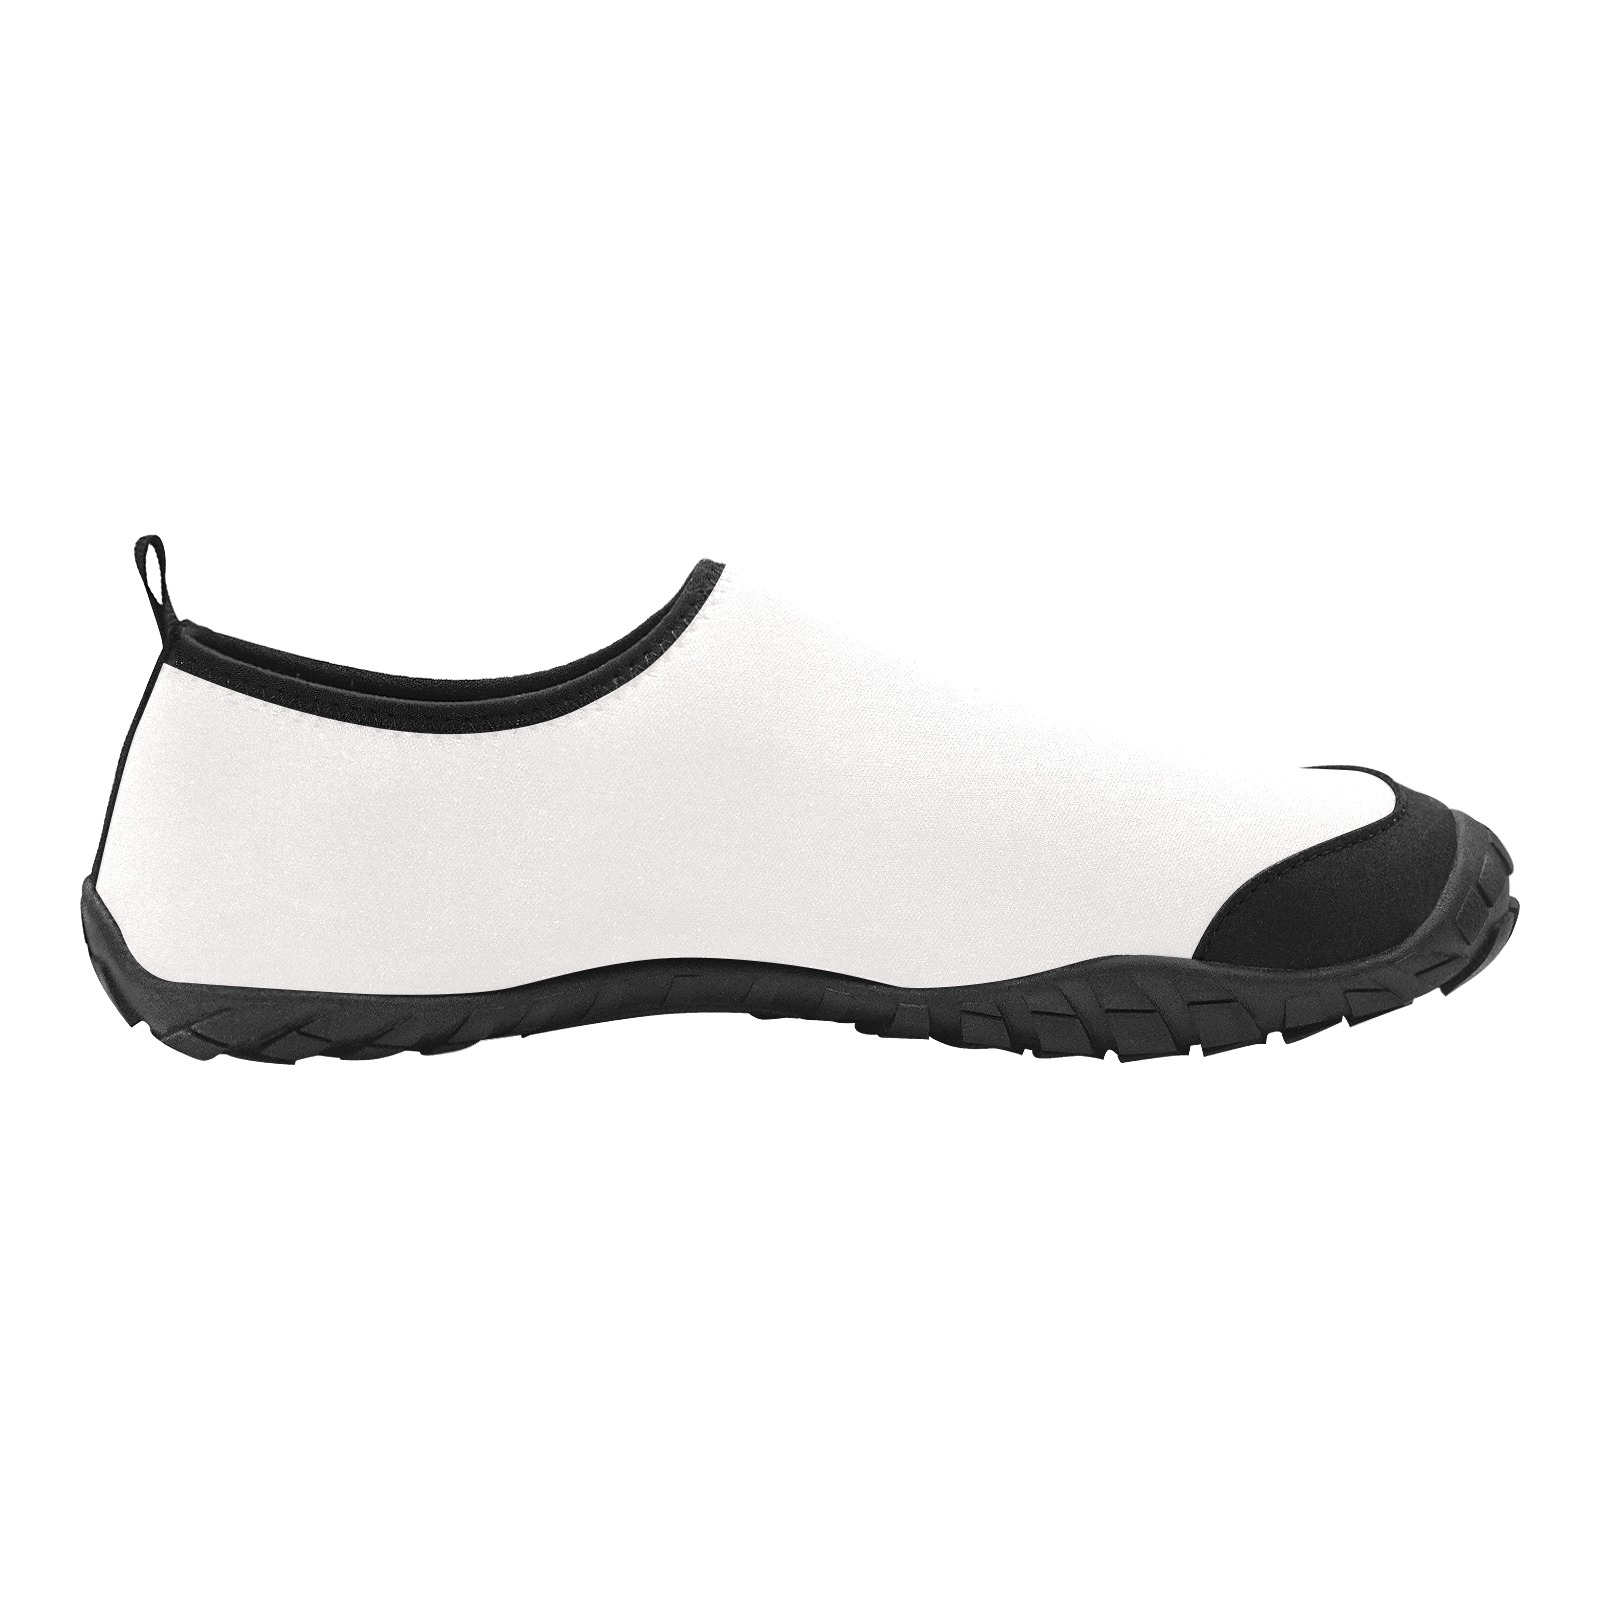 Men's Barefoot Water Shoes (Model KY21091)